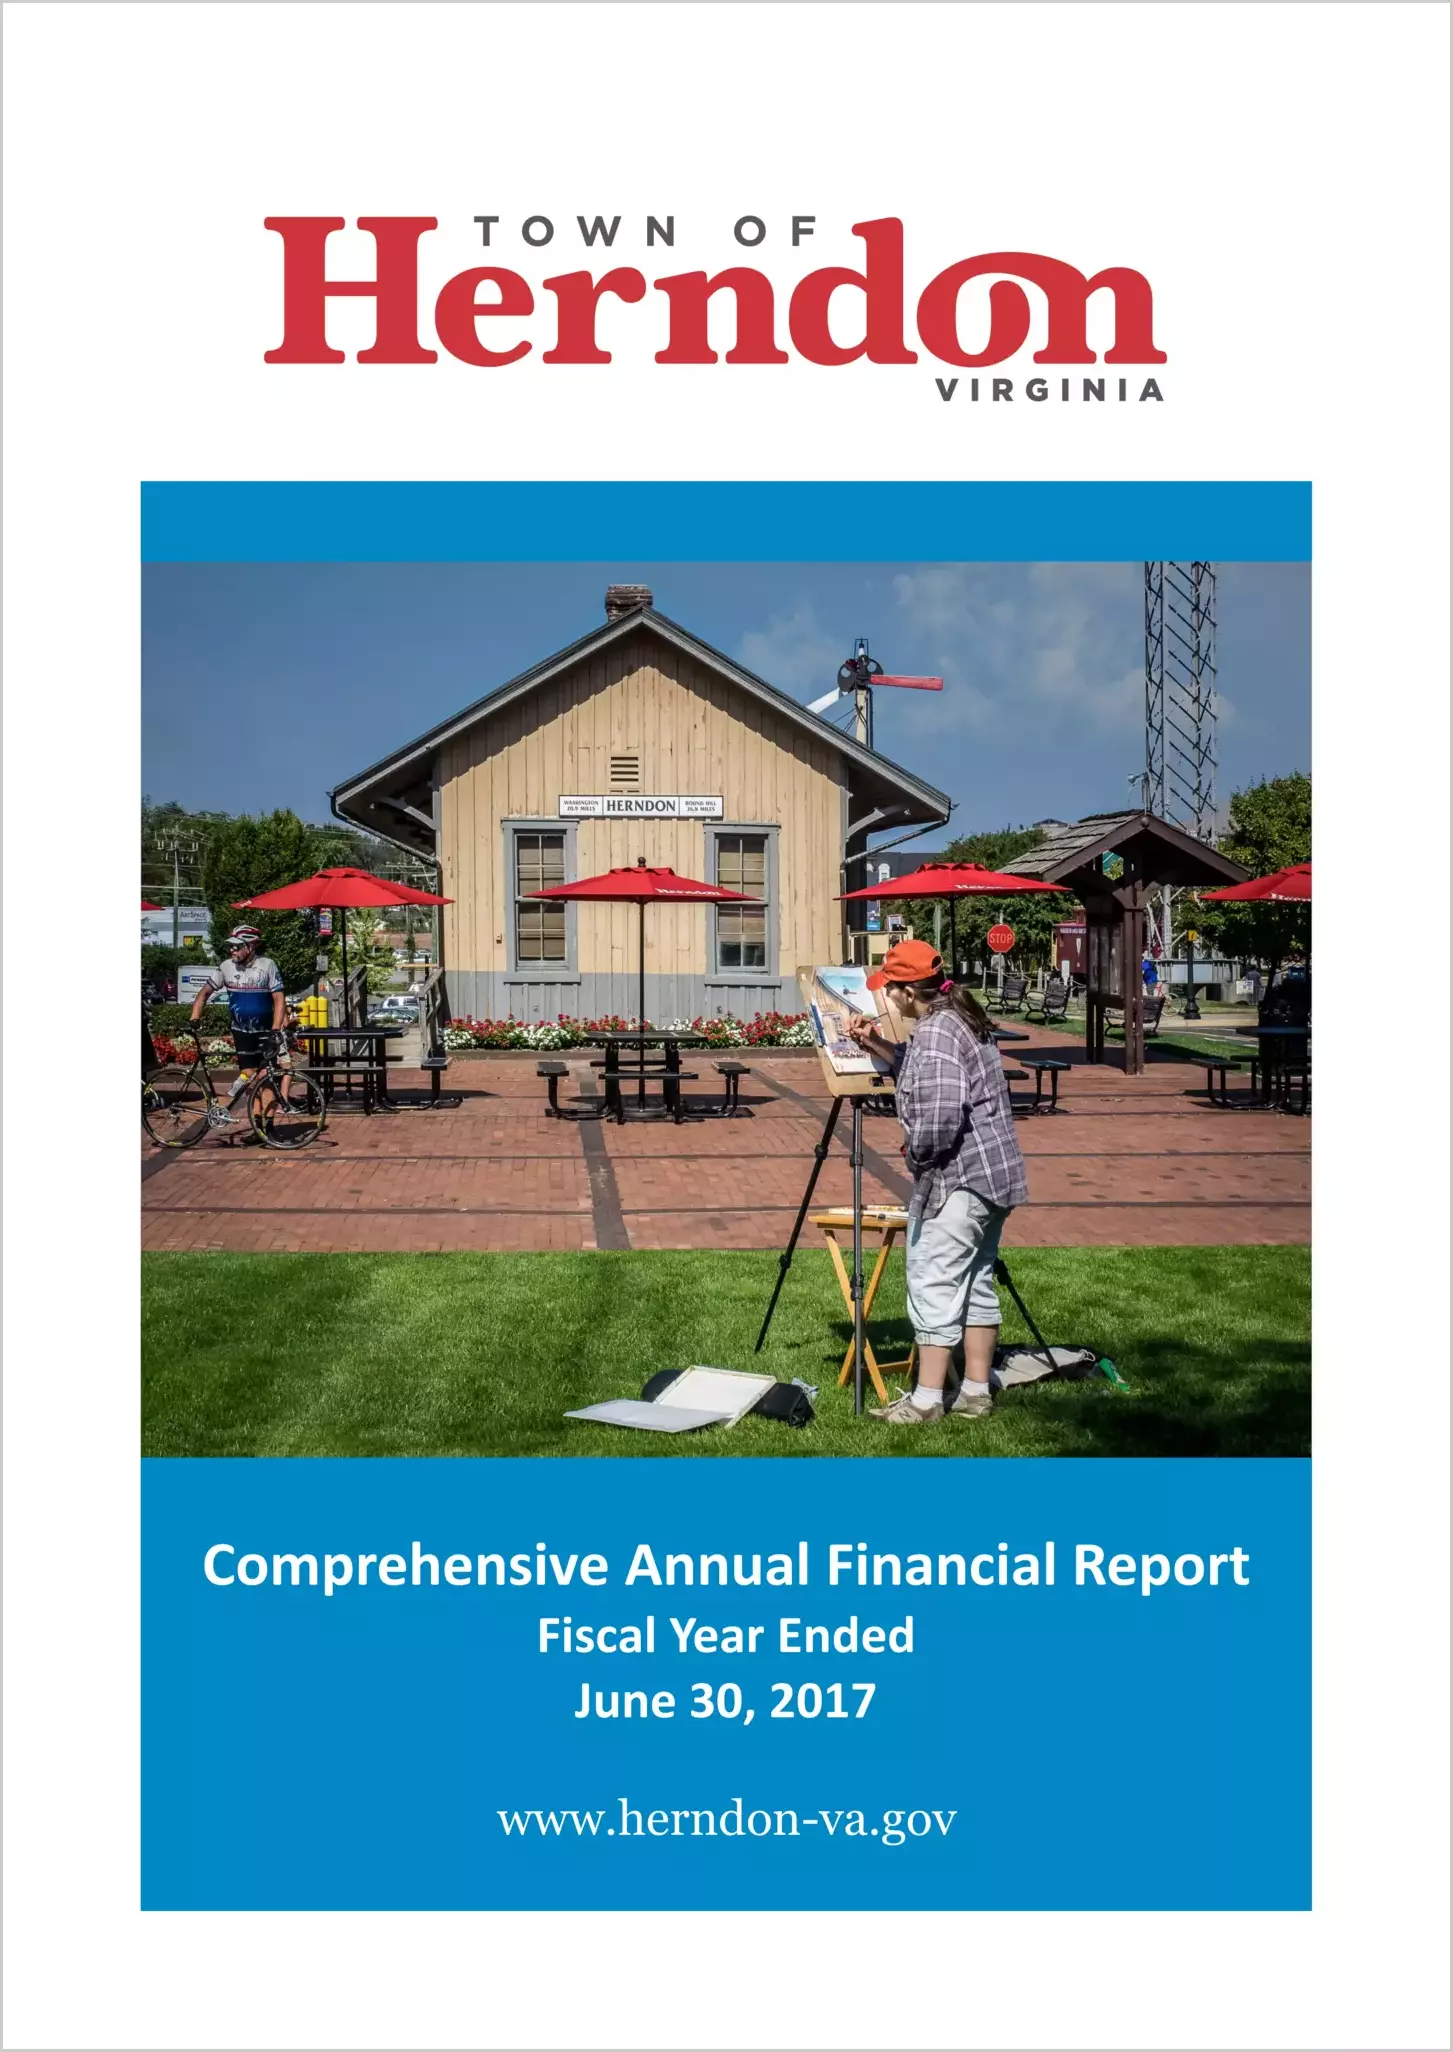 2017 Annual Financial Report for Town of Herndon